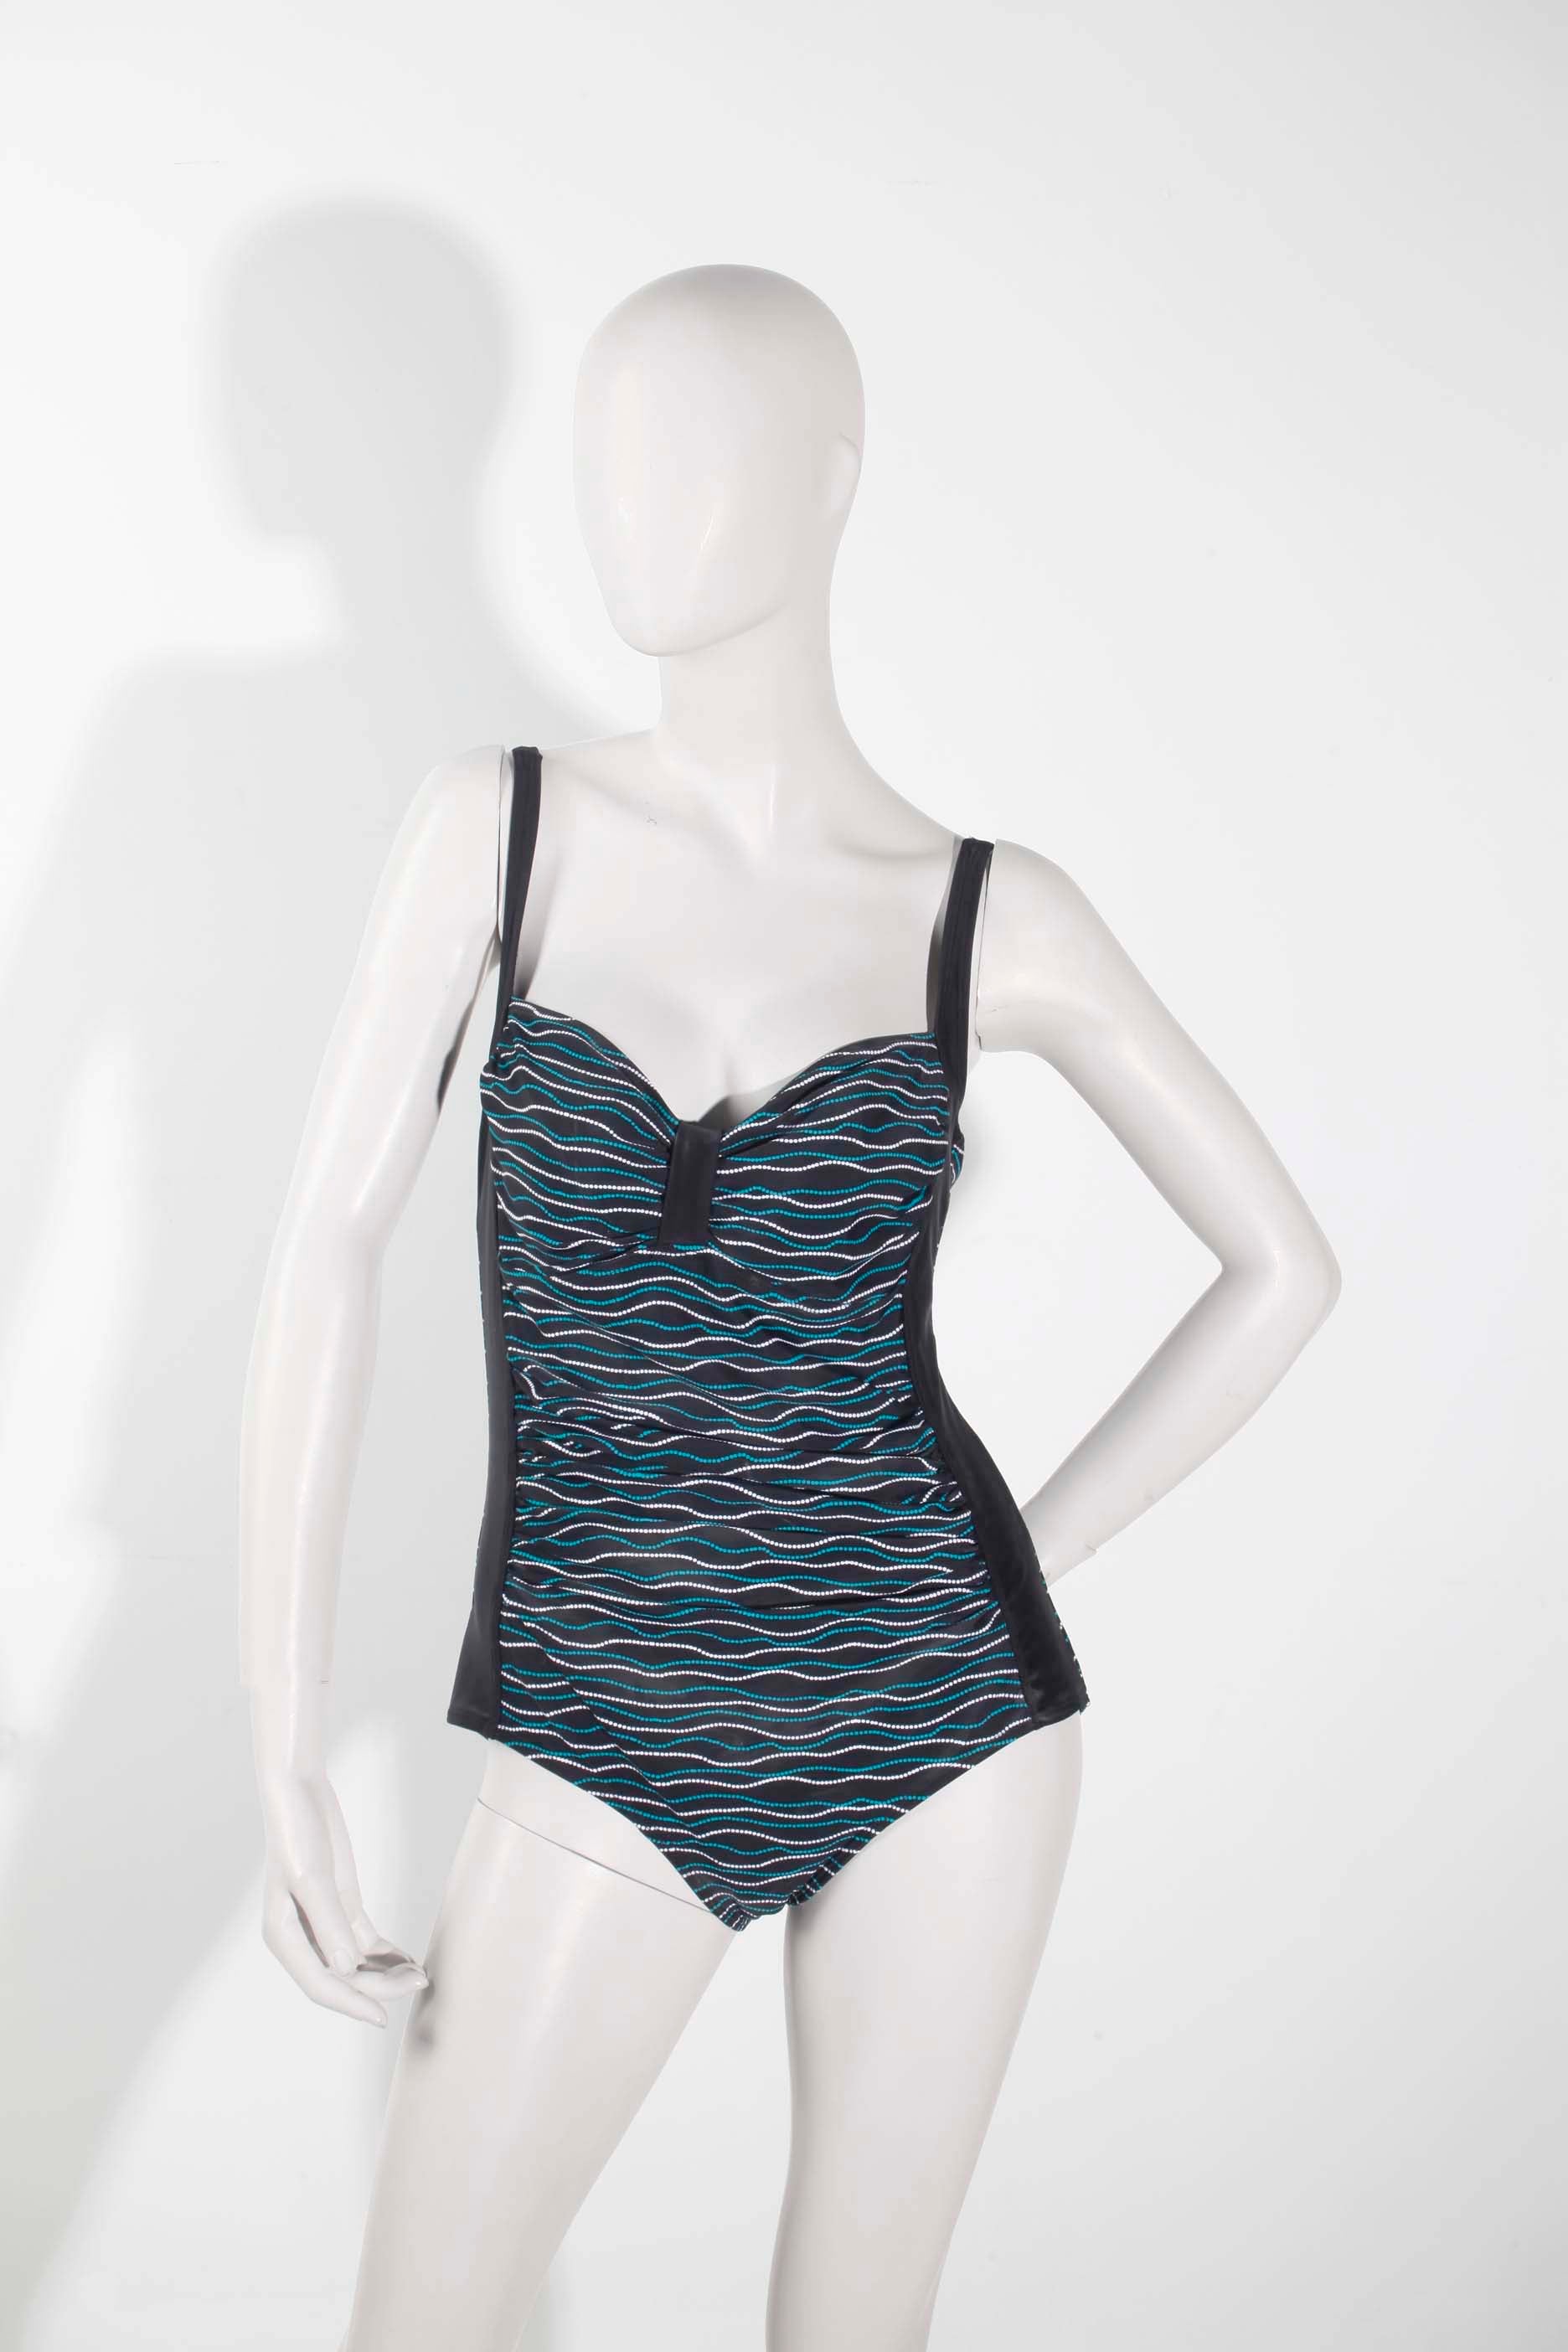 Printed Swimsuit (Large)